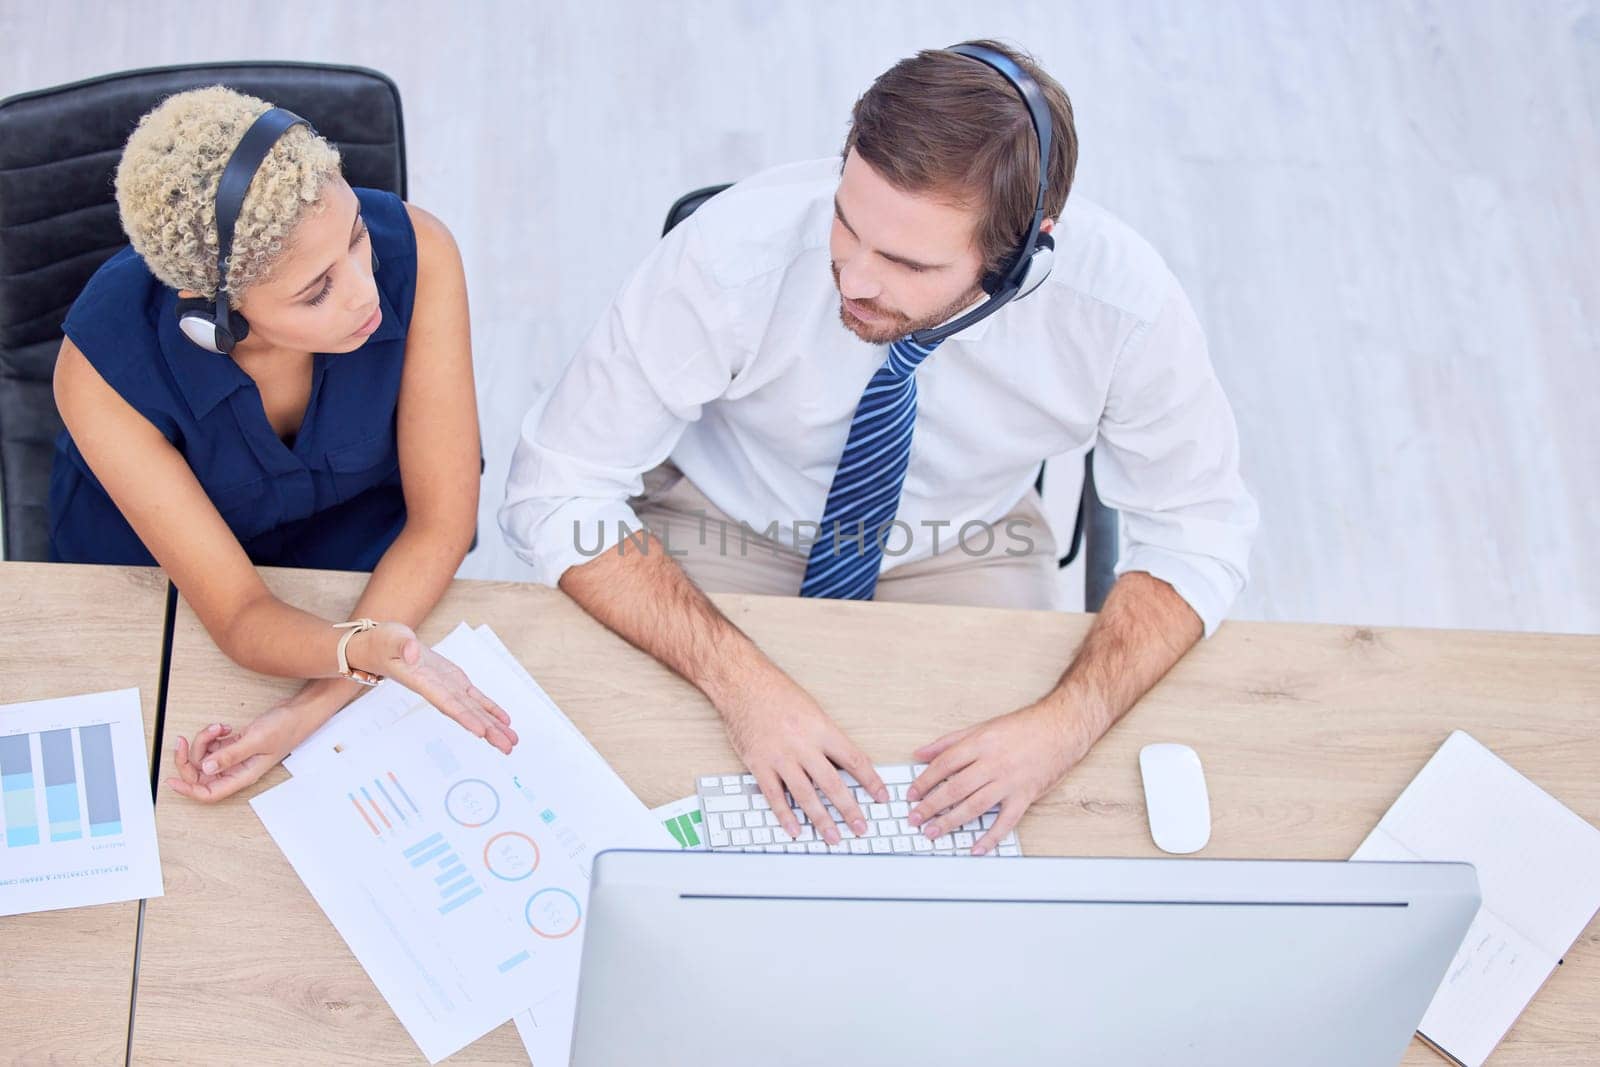 Call center, collaboration and overhead with a woman supervisor training a man employee in a telemarketing office. Customer care, teamwork and support with a female agent teaching a male colleague.